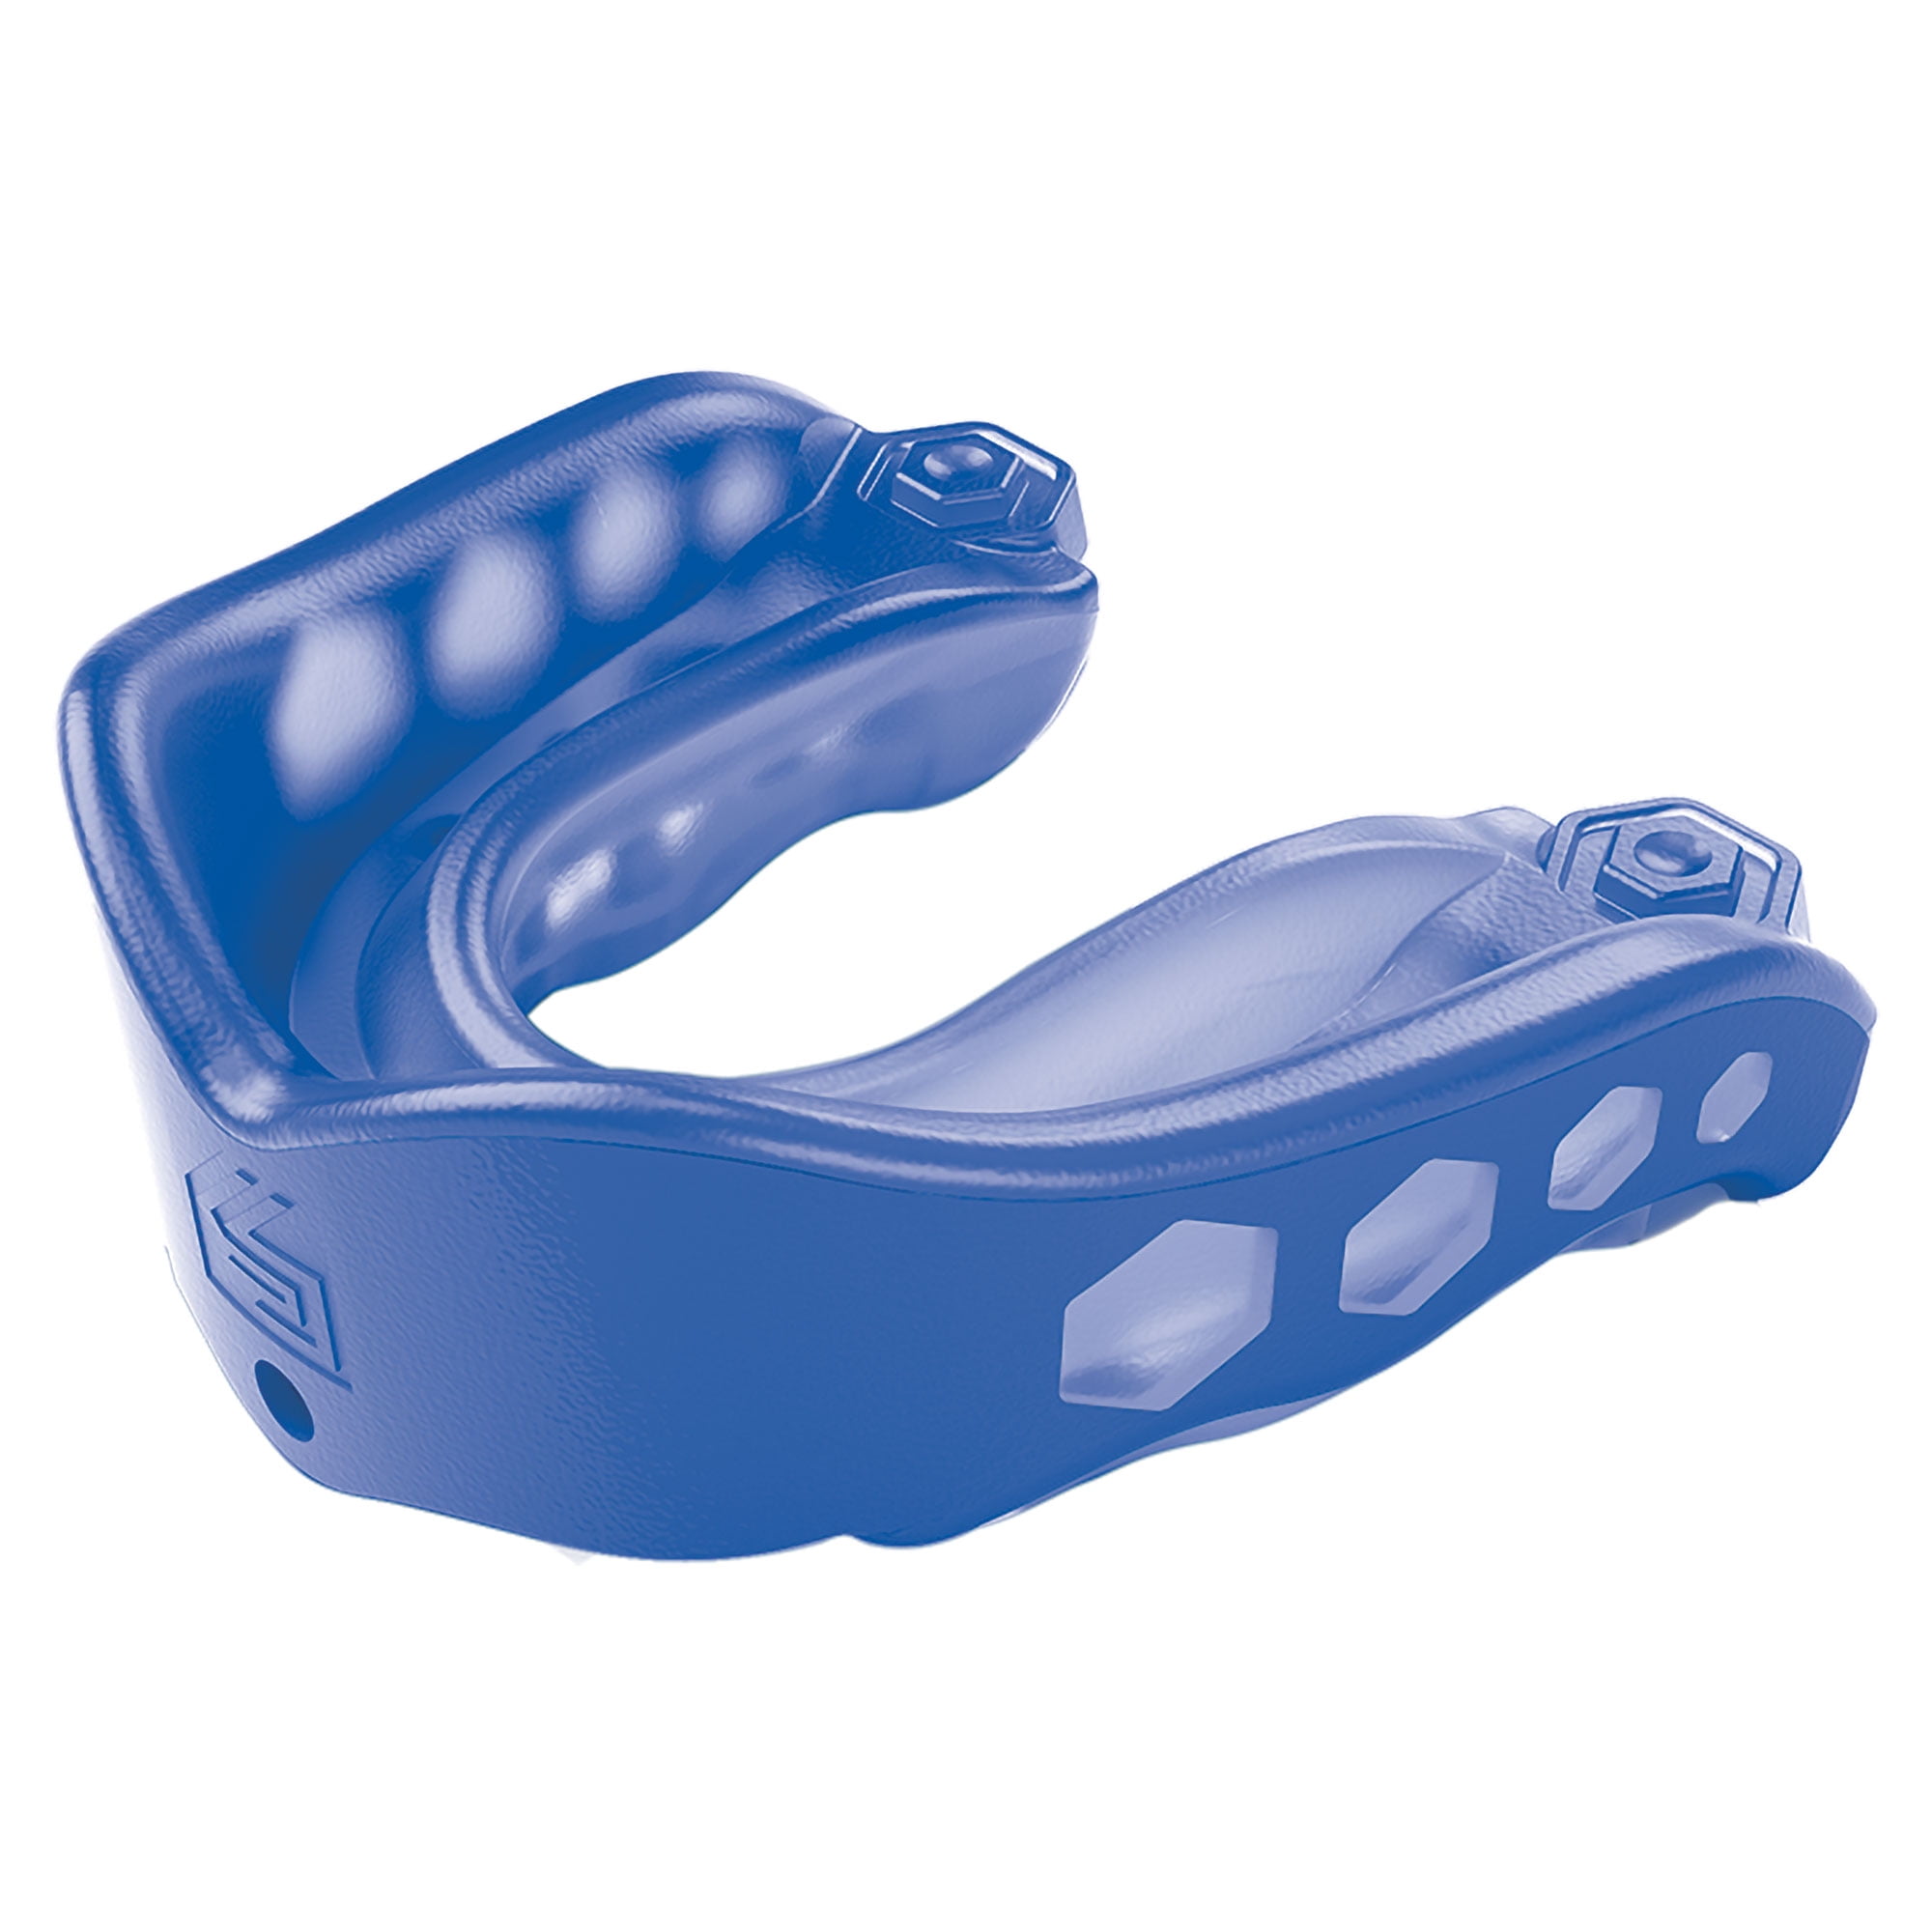 Box U Details about   Shock Doctor sport gel Max Mouth Guard flavor Fusion  punch age 11 